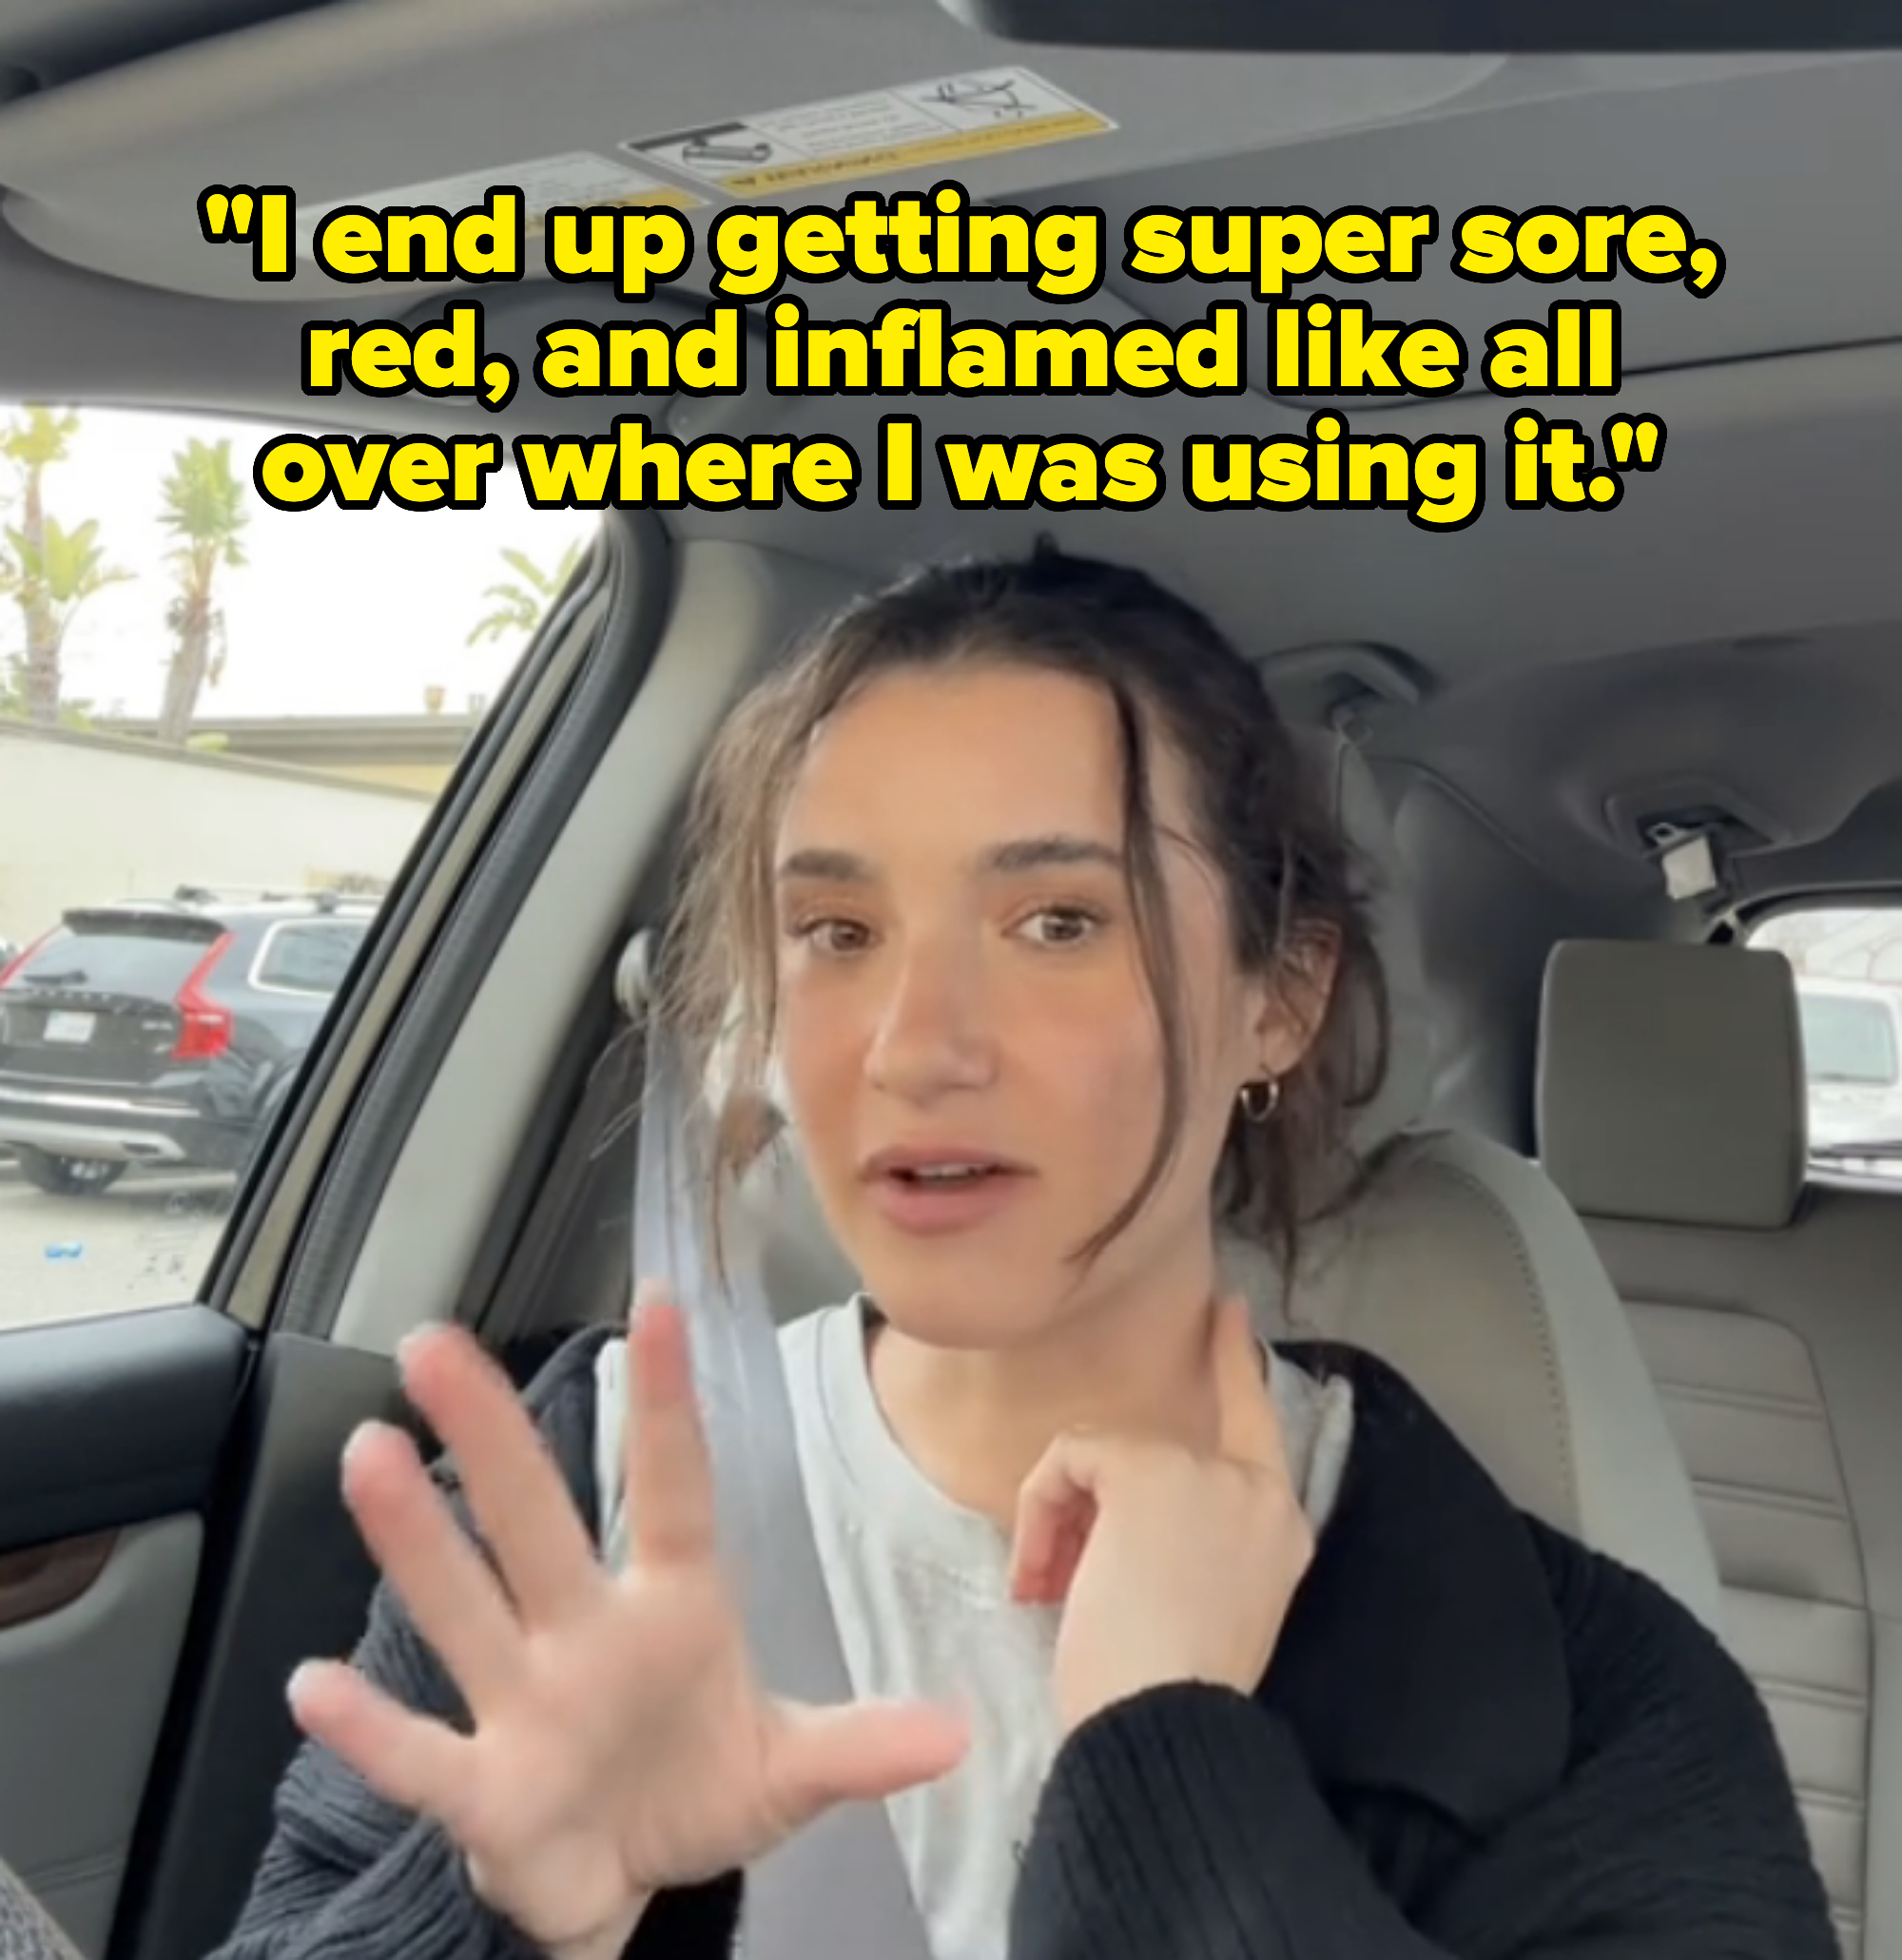 &quot;I end up getting super sore, red, inflamed like all over where I was using it and I was like, &quot;Oh god, I feel like worse,&#x27;&quot;